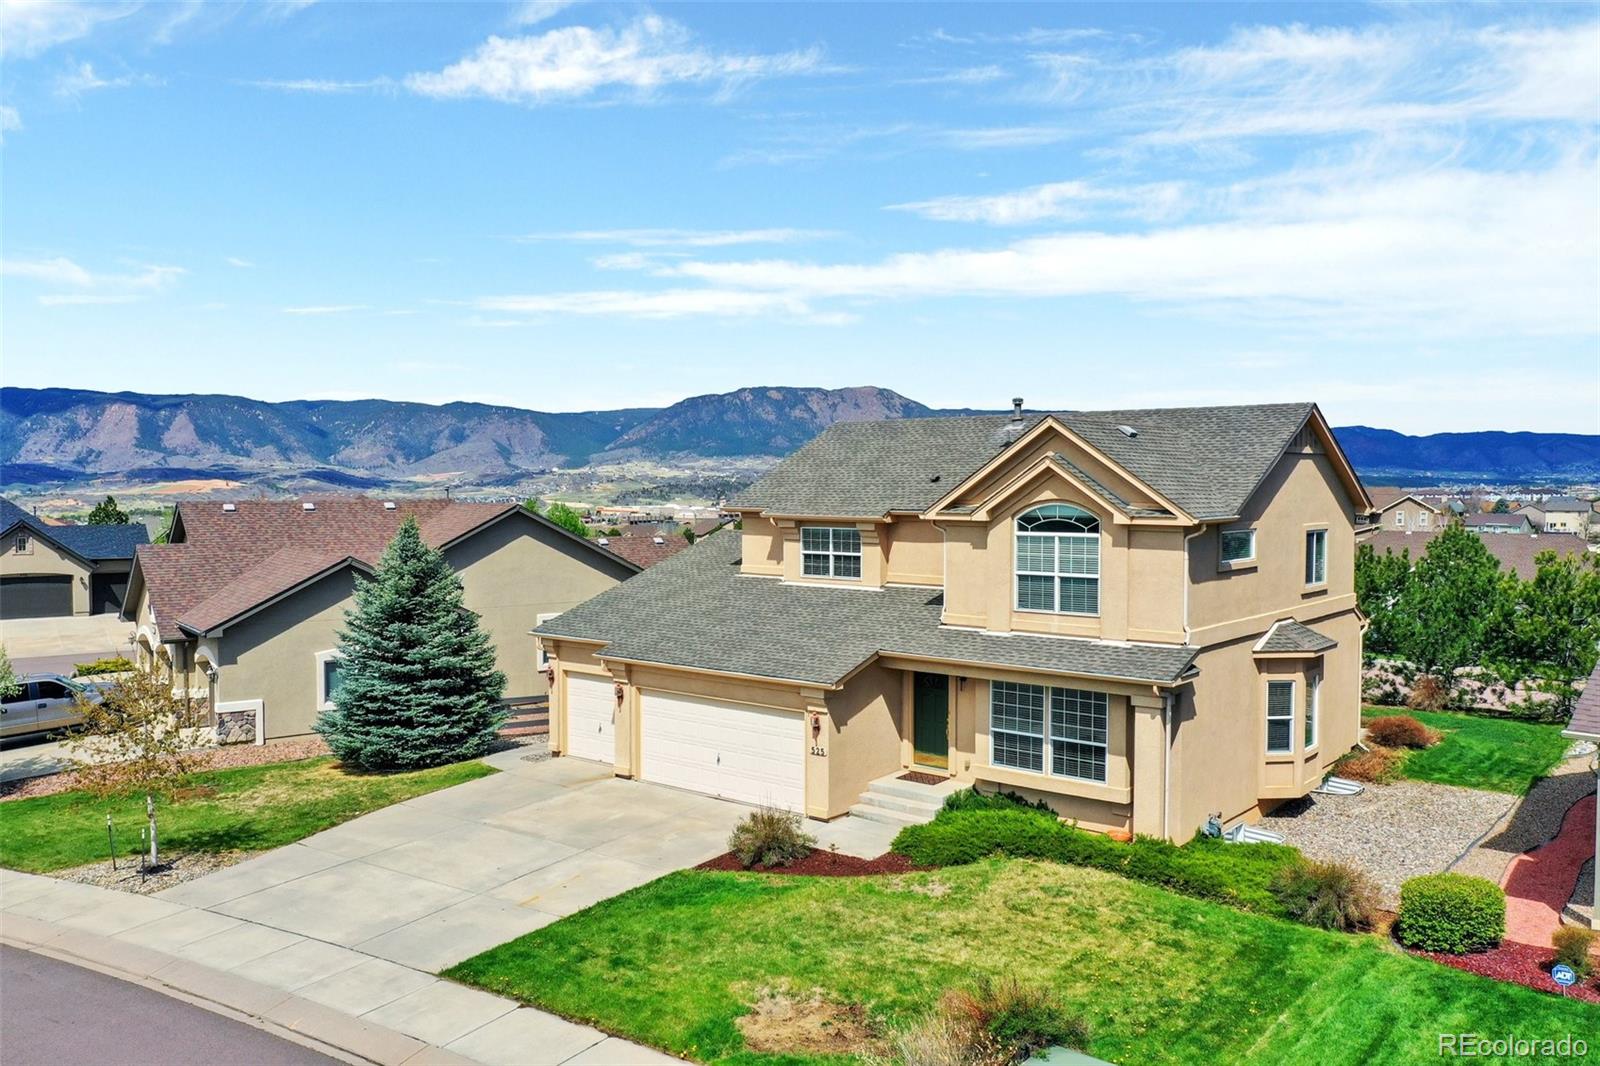 525 Talus Road, Monument, CO 80132 - MLS#: 8212760